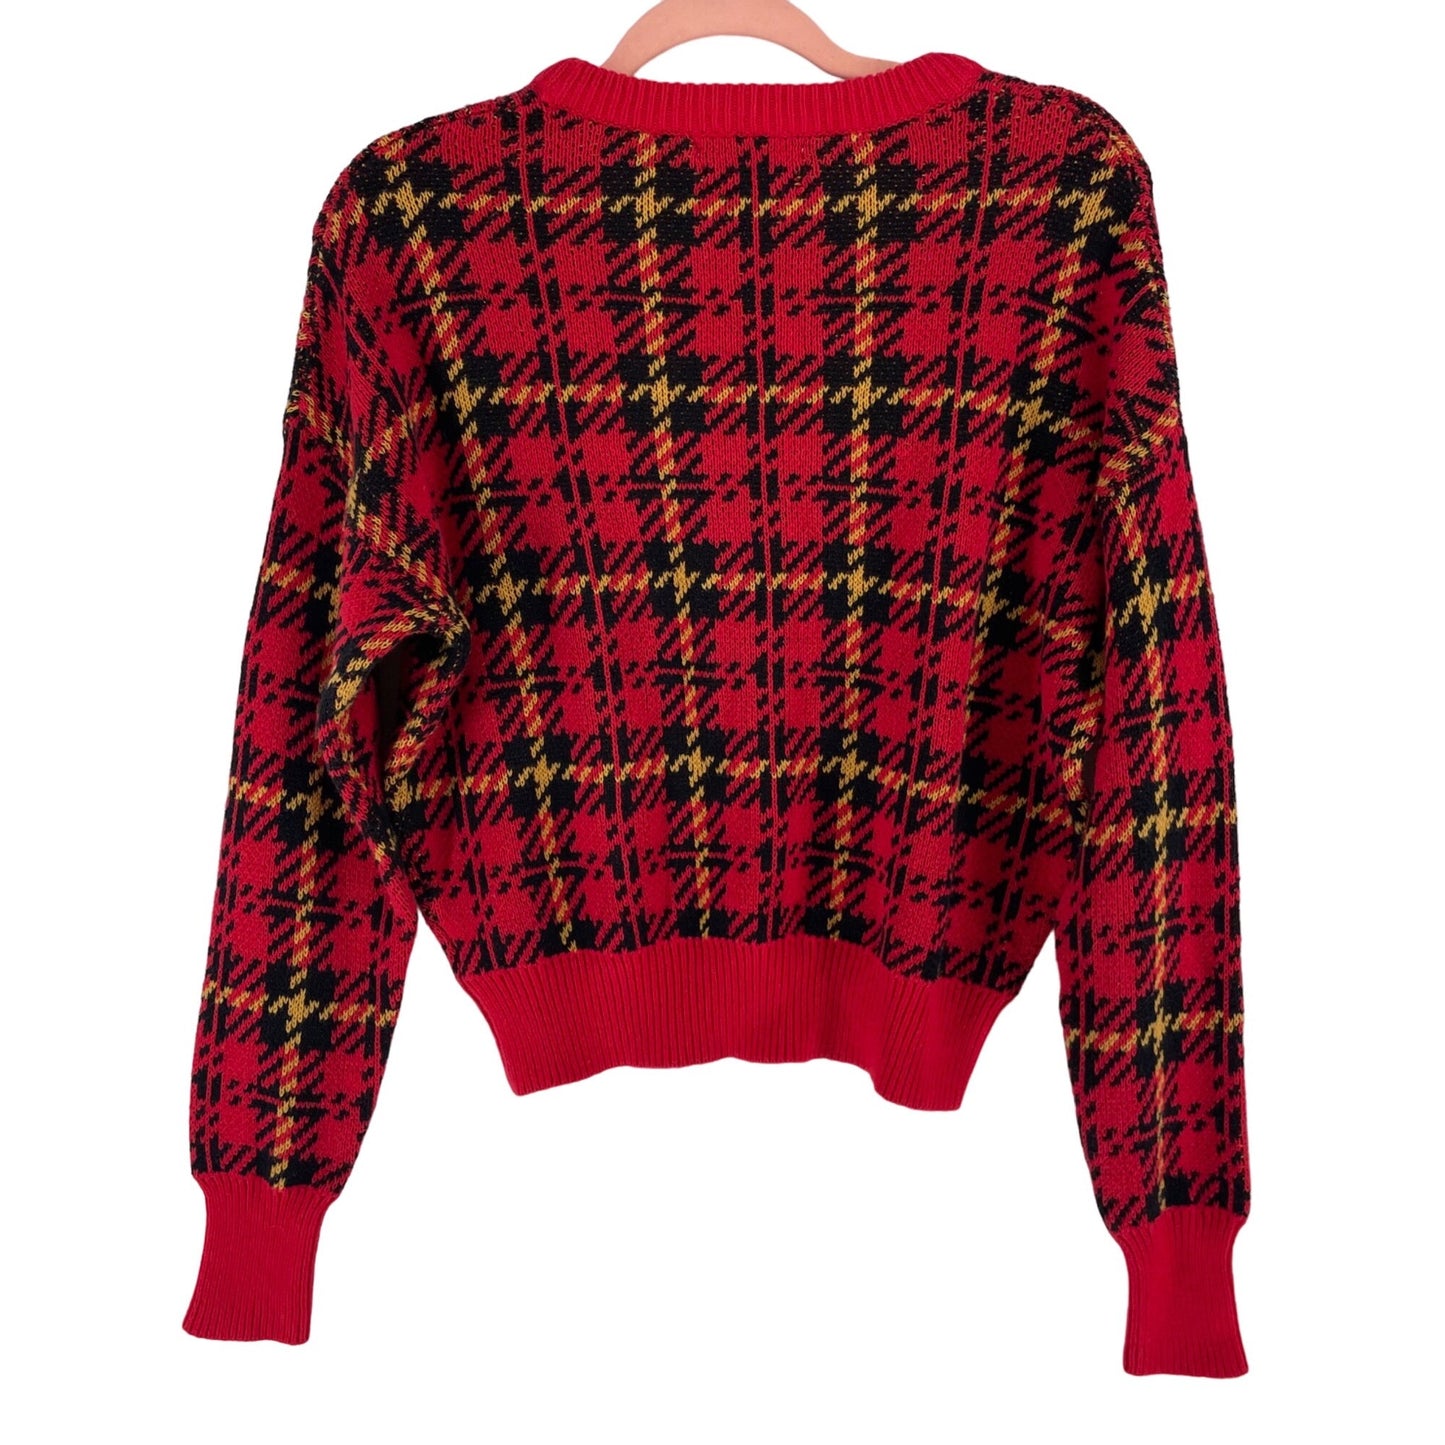 Urban Outfitters Women's Size Medium Red, Black & Yellow Plaid Crew Neck Sweater